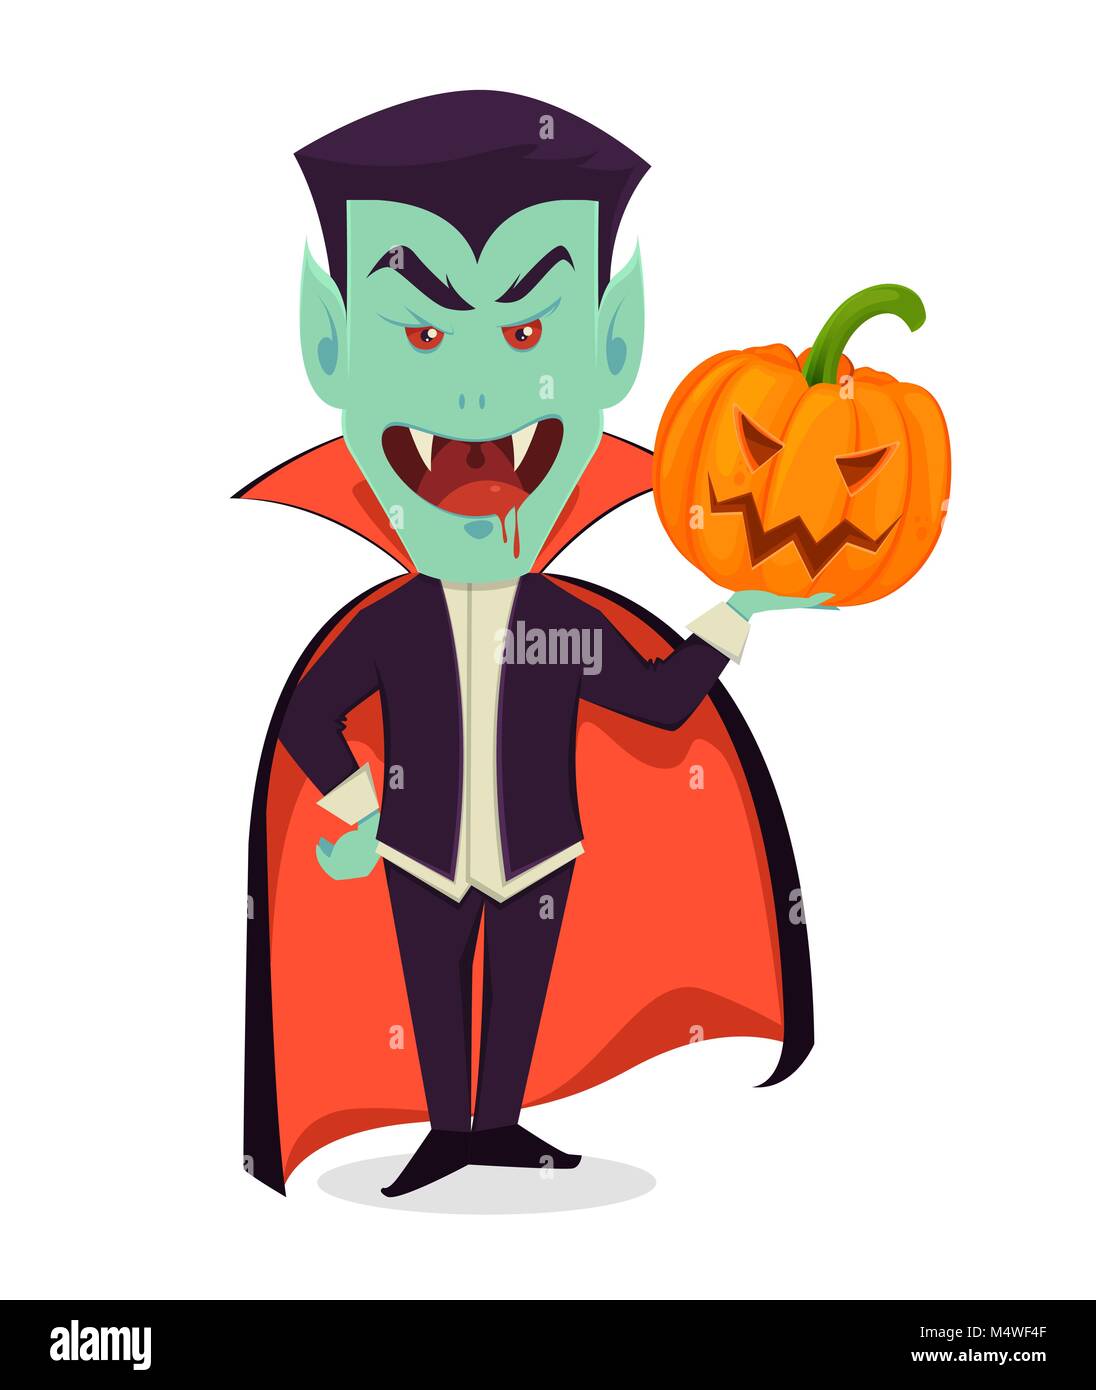 Halloween invitation or greeting card. Funny vampire holding pumpkin, cute cartoon character. Vector illustration on white background Stock Vector